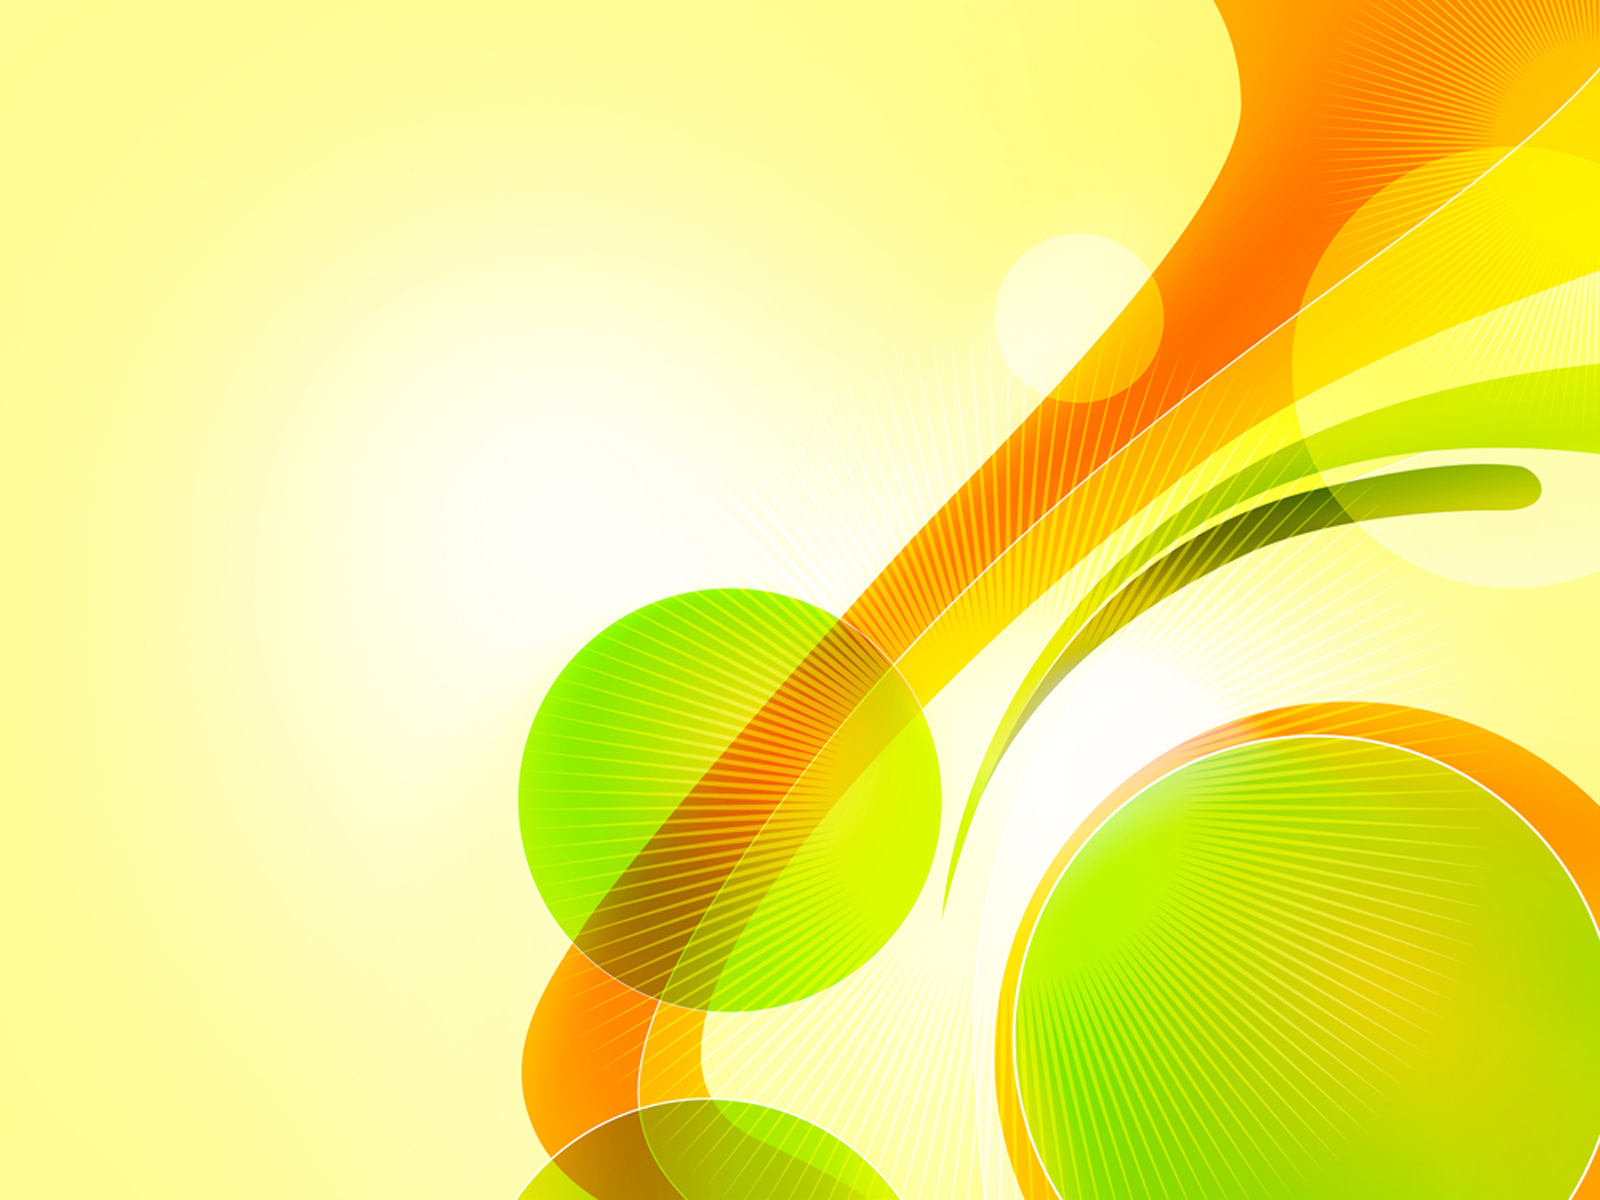 Circles and Swirls PPT Backgrounds